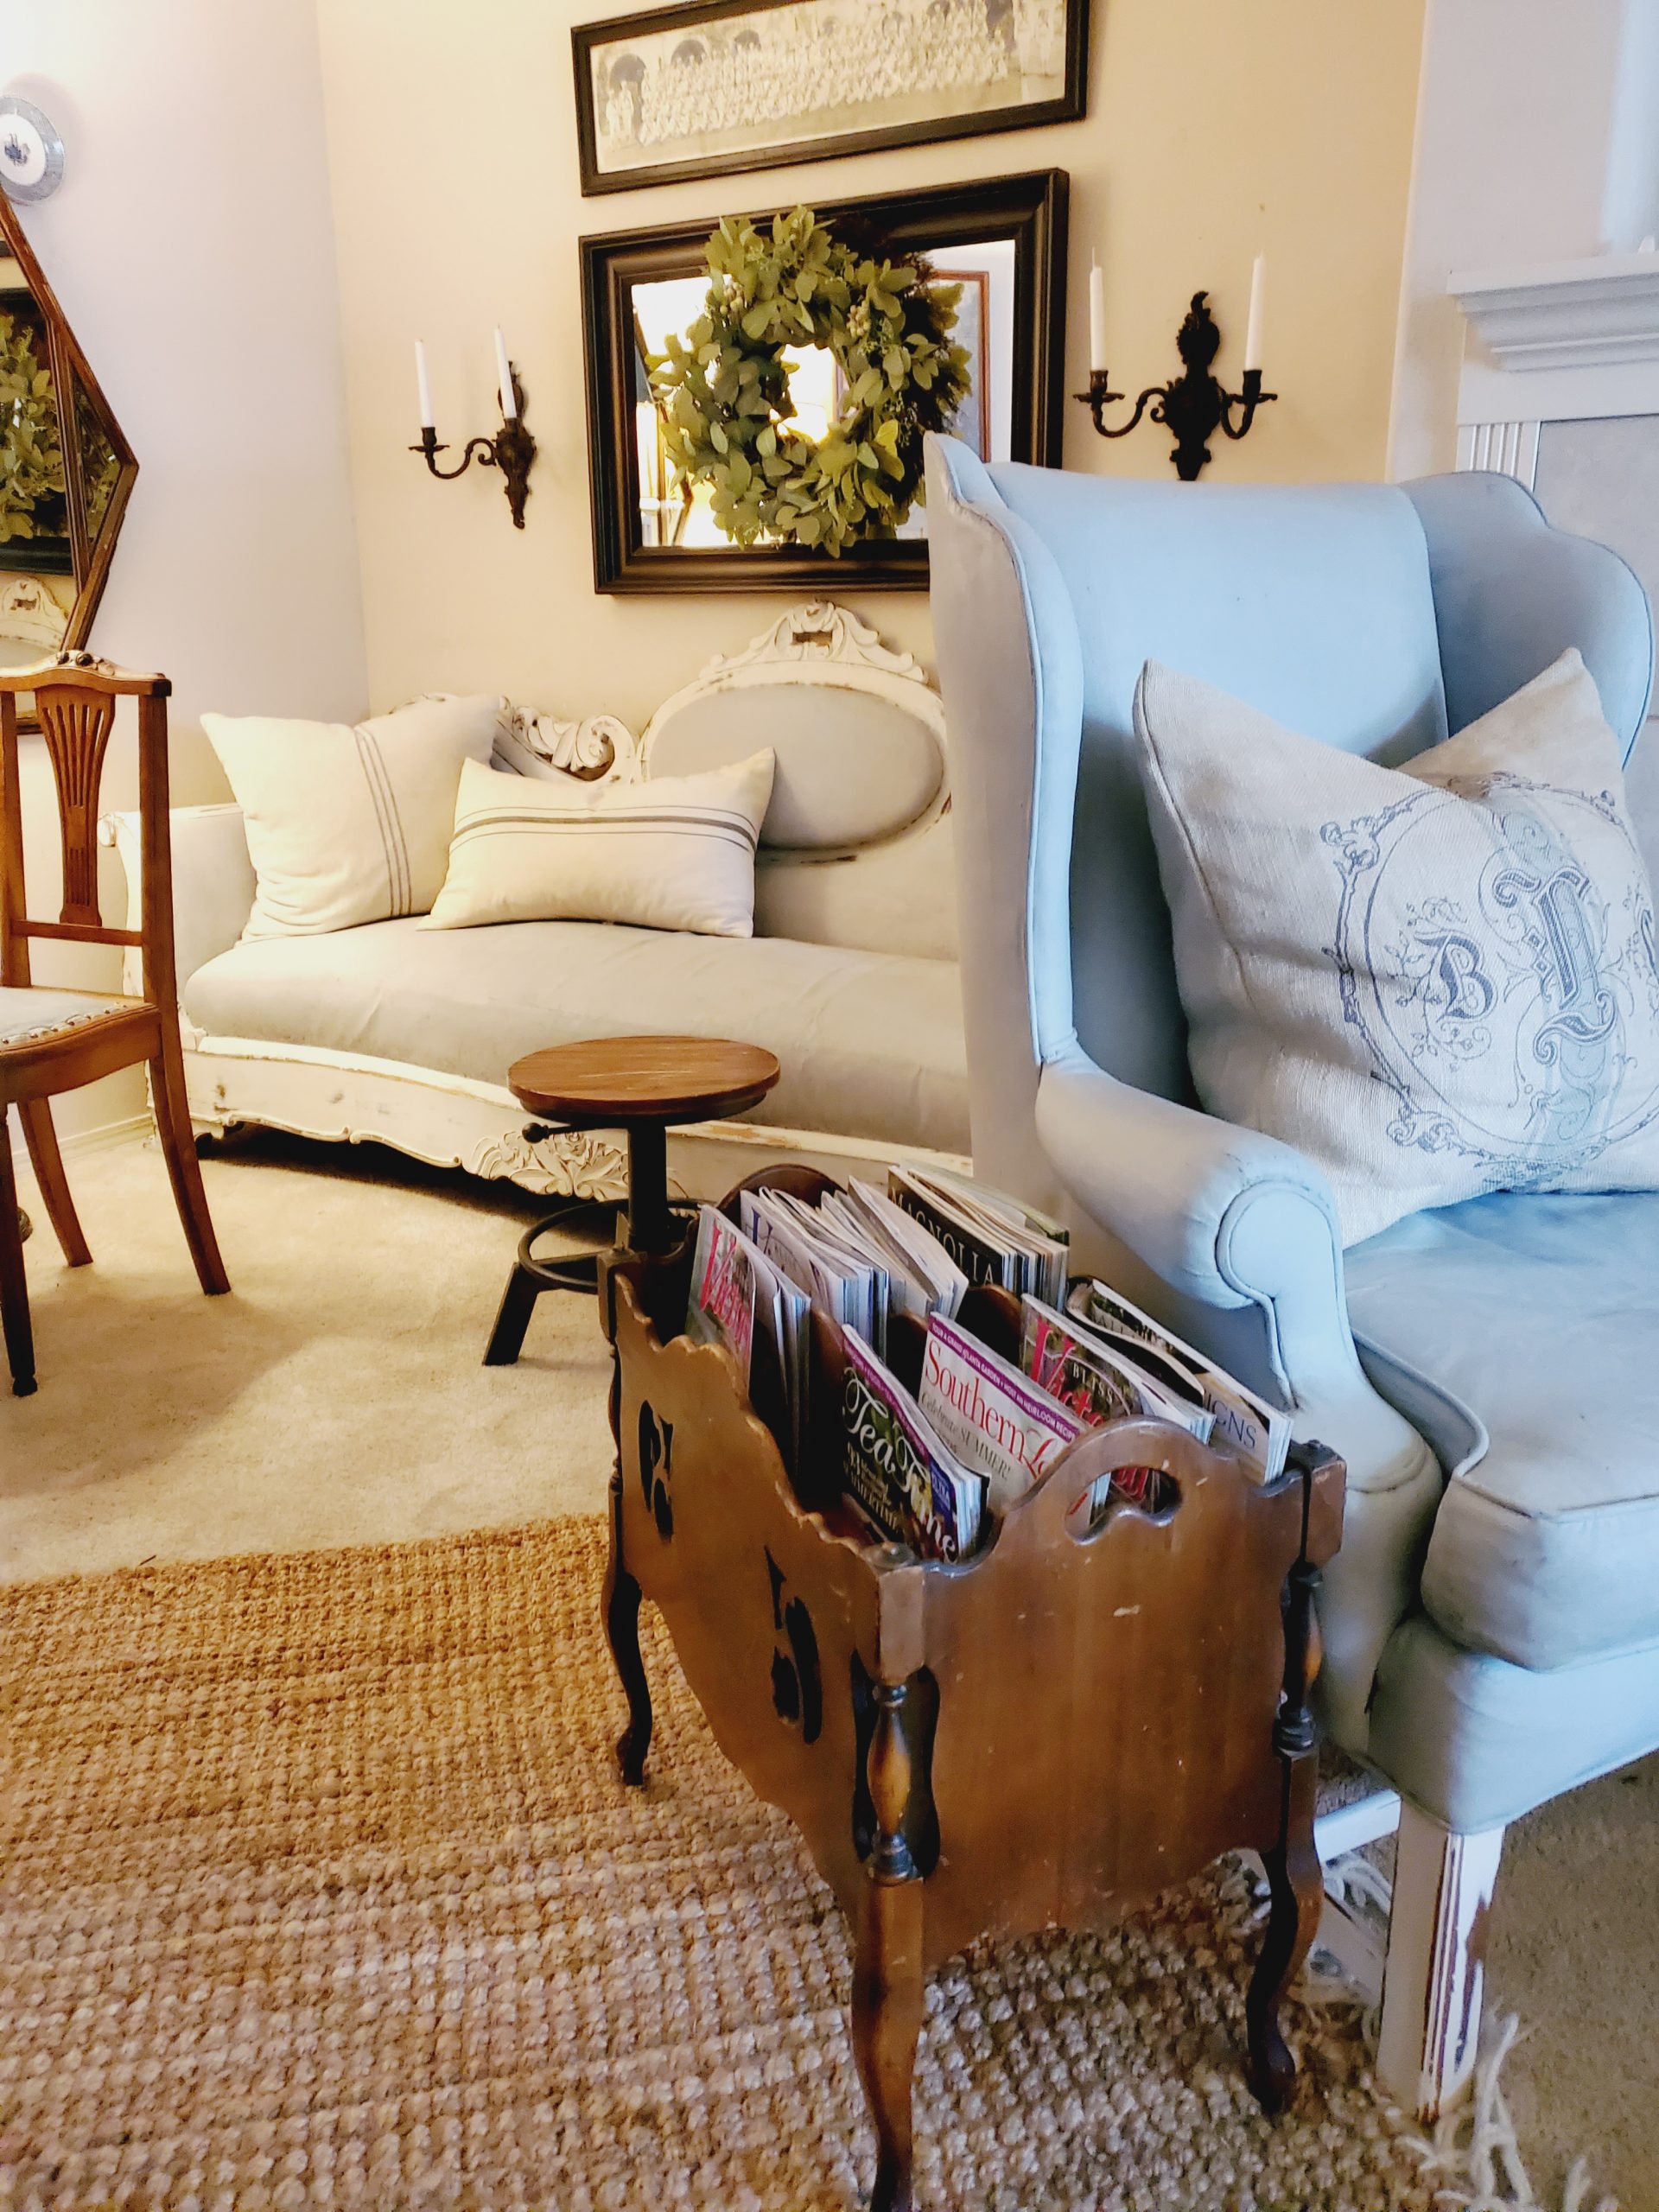 How to Combine the Victorian & Farmhouse Style when Decorating